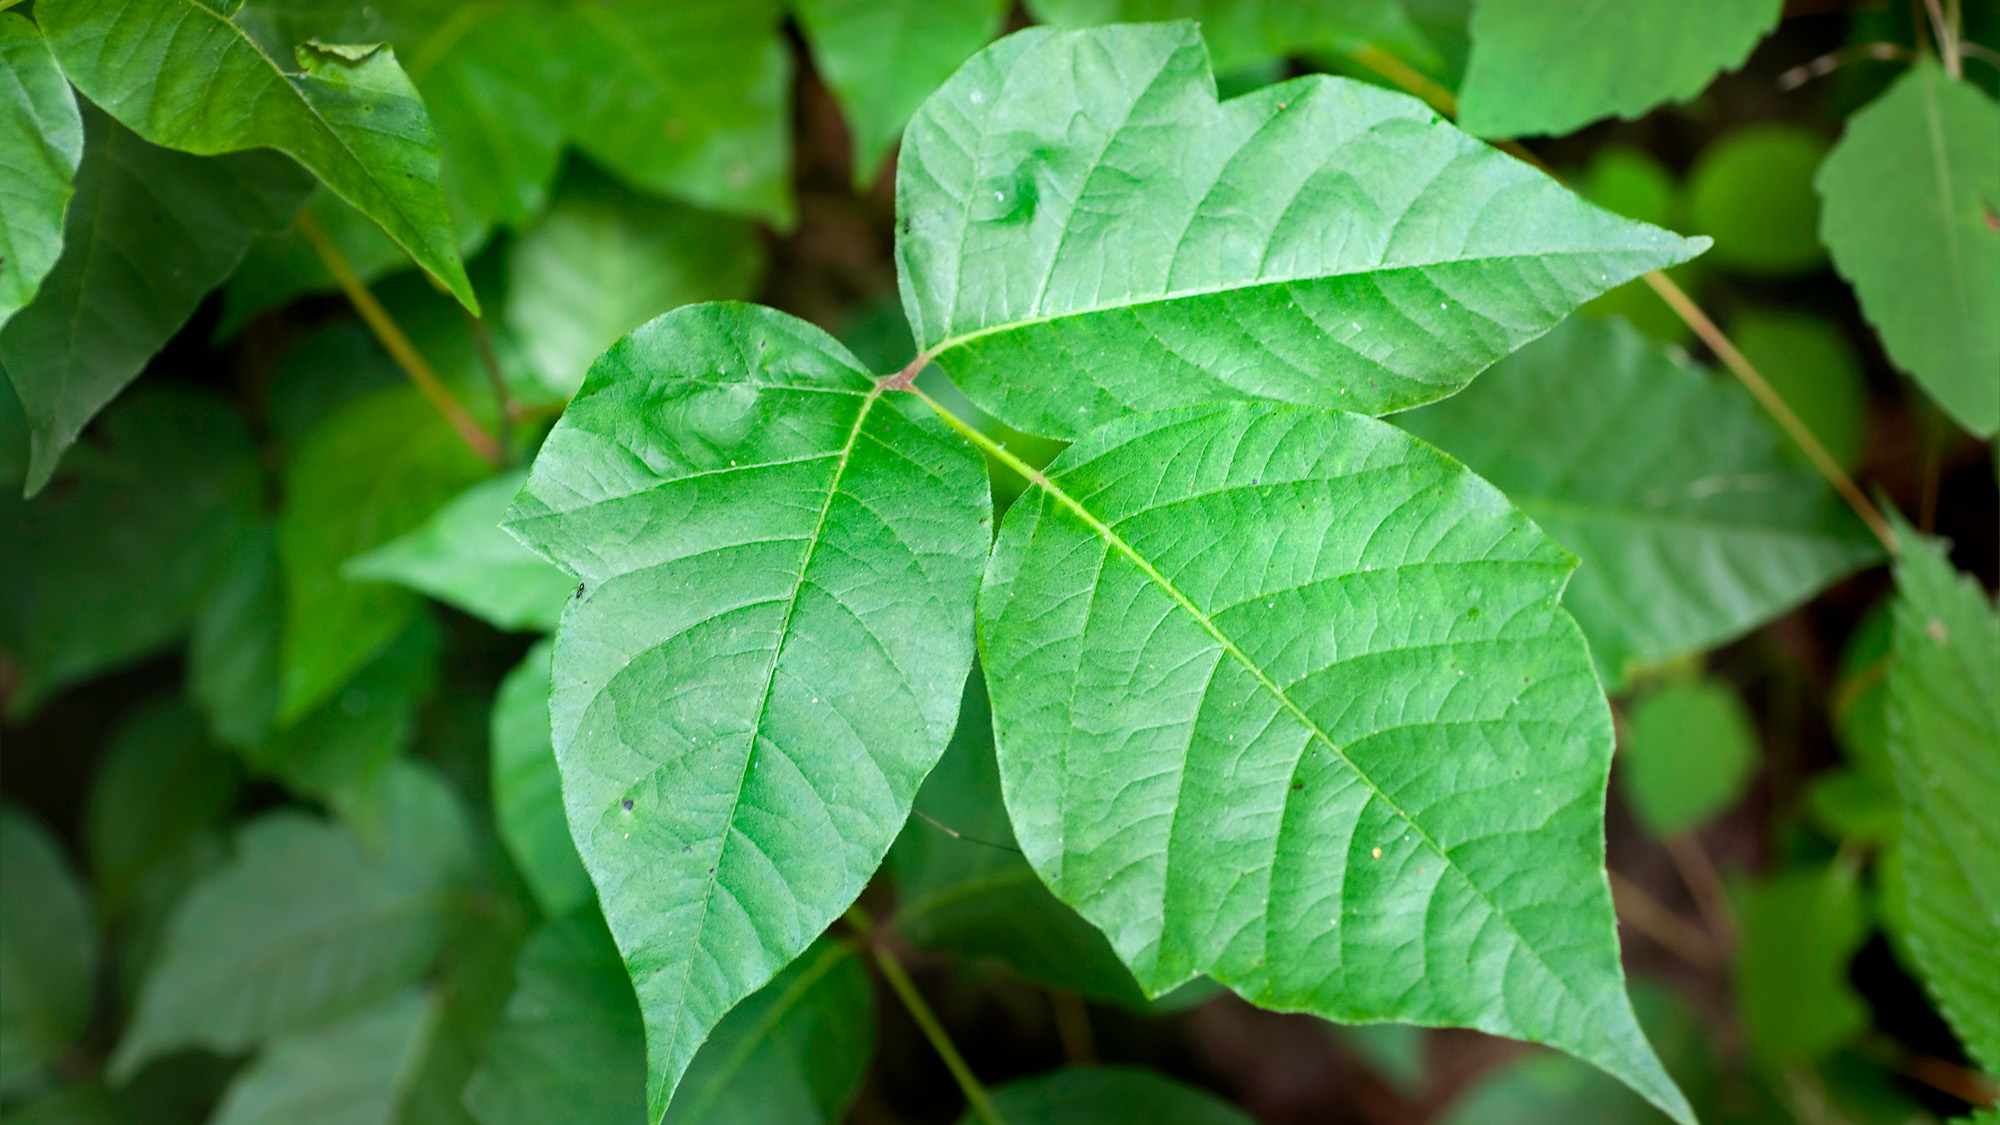 A bunch of poison ivy leaves which you'll need to learn to spot to avoid an allergic reaction.